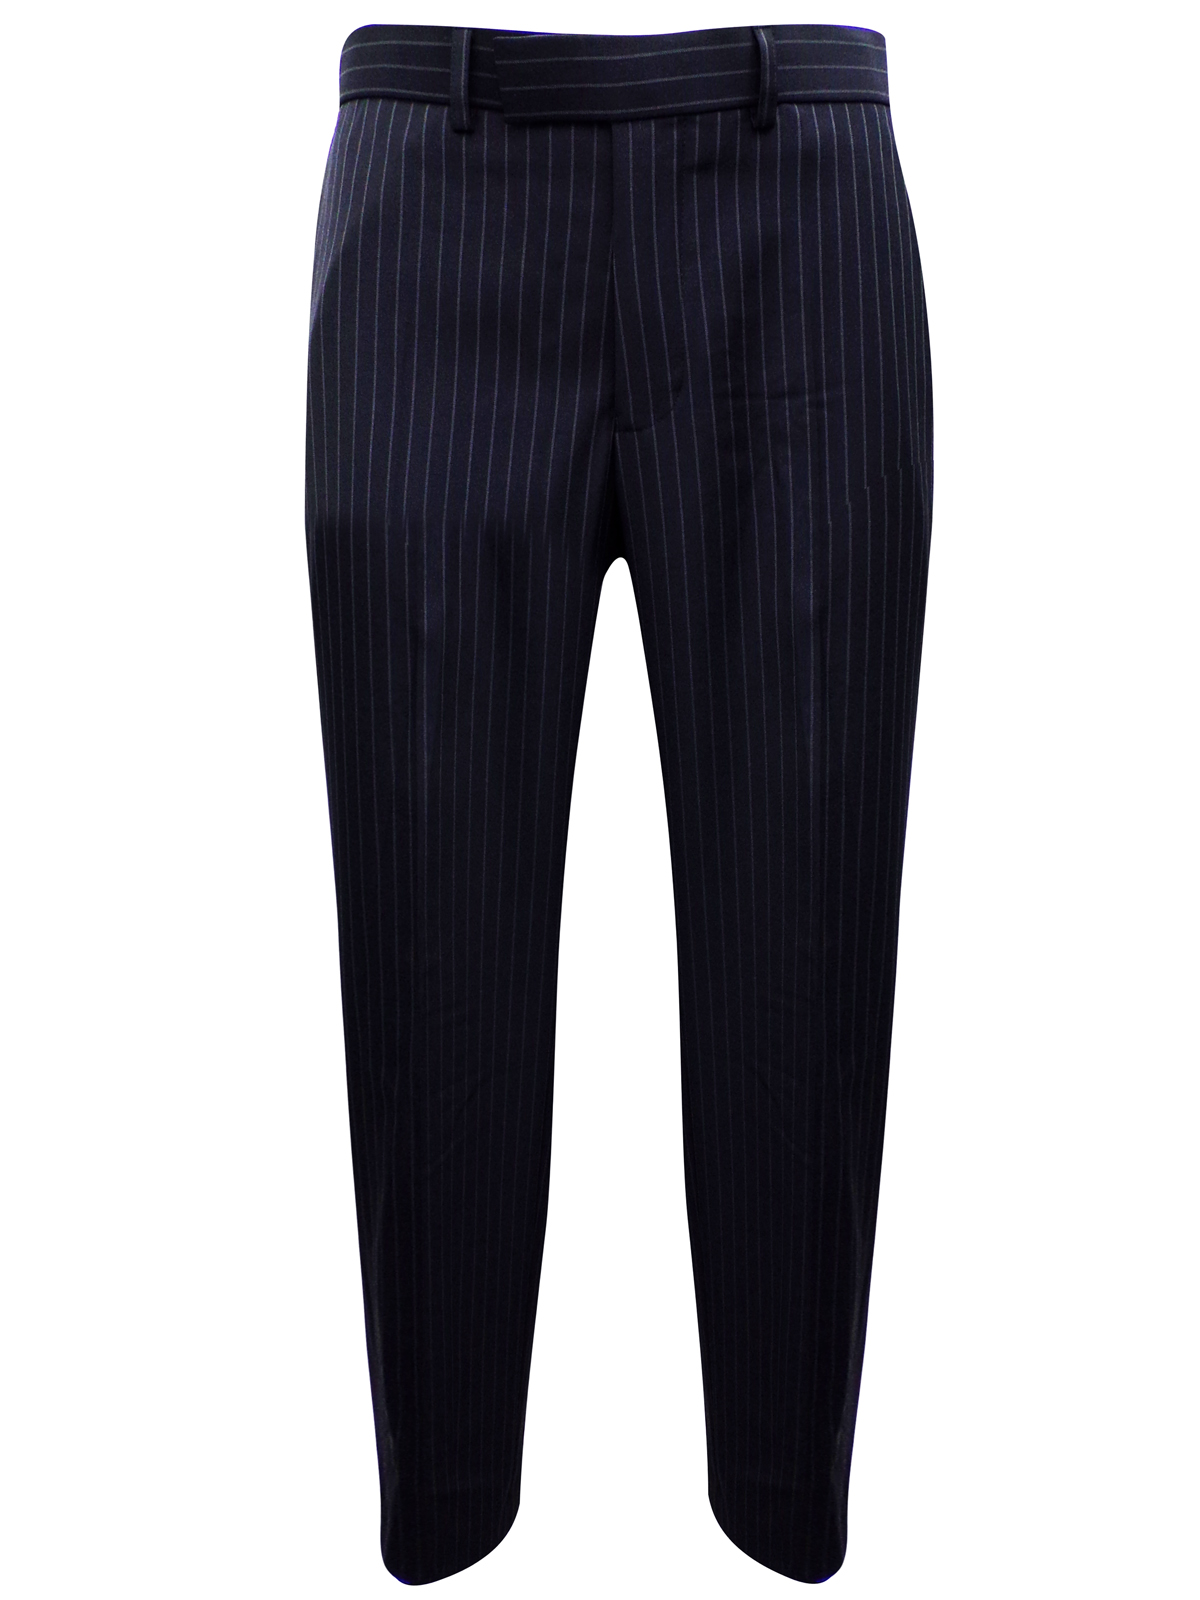 Marks and Spencer - - M&5 BLACK Slim Fit Flat Front Pinstripe Trousers ...